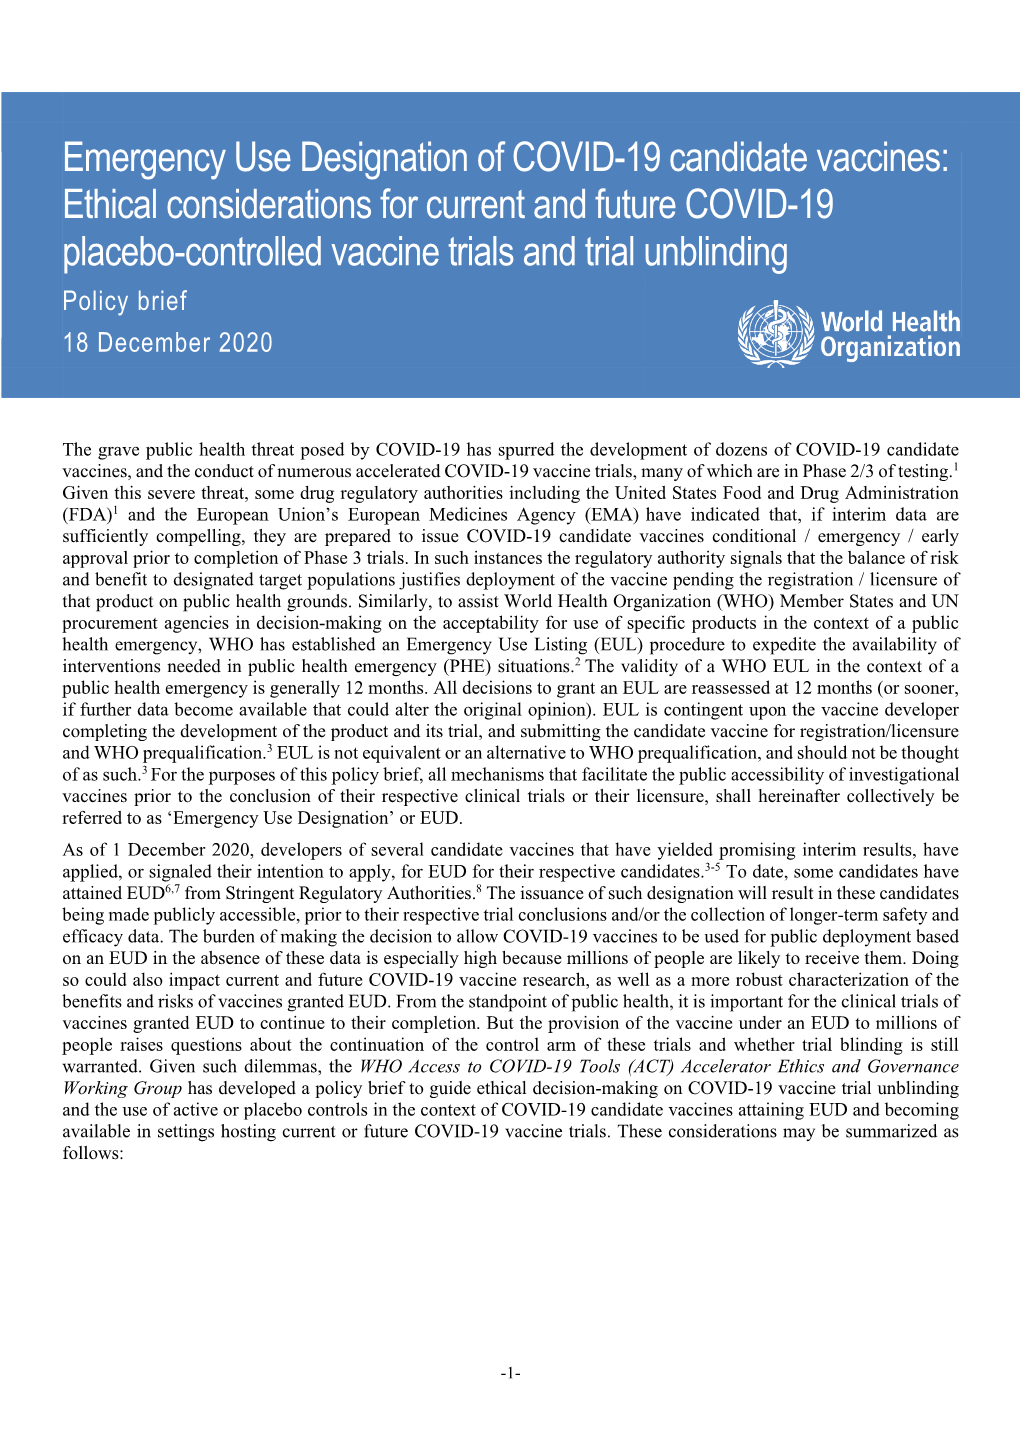 Ethical Considerations for Current and Future COVID-19 Placebo-Controlled Vaccine Trials and Trial Unblinding Policy Brief 18 December 2020